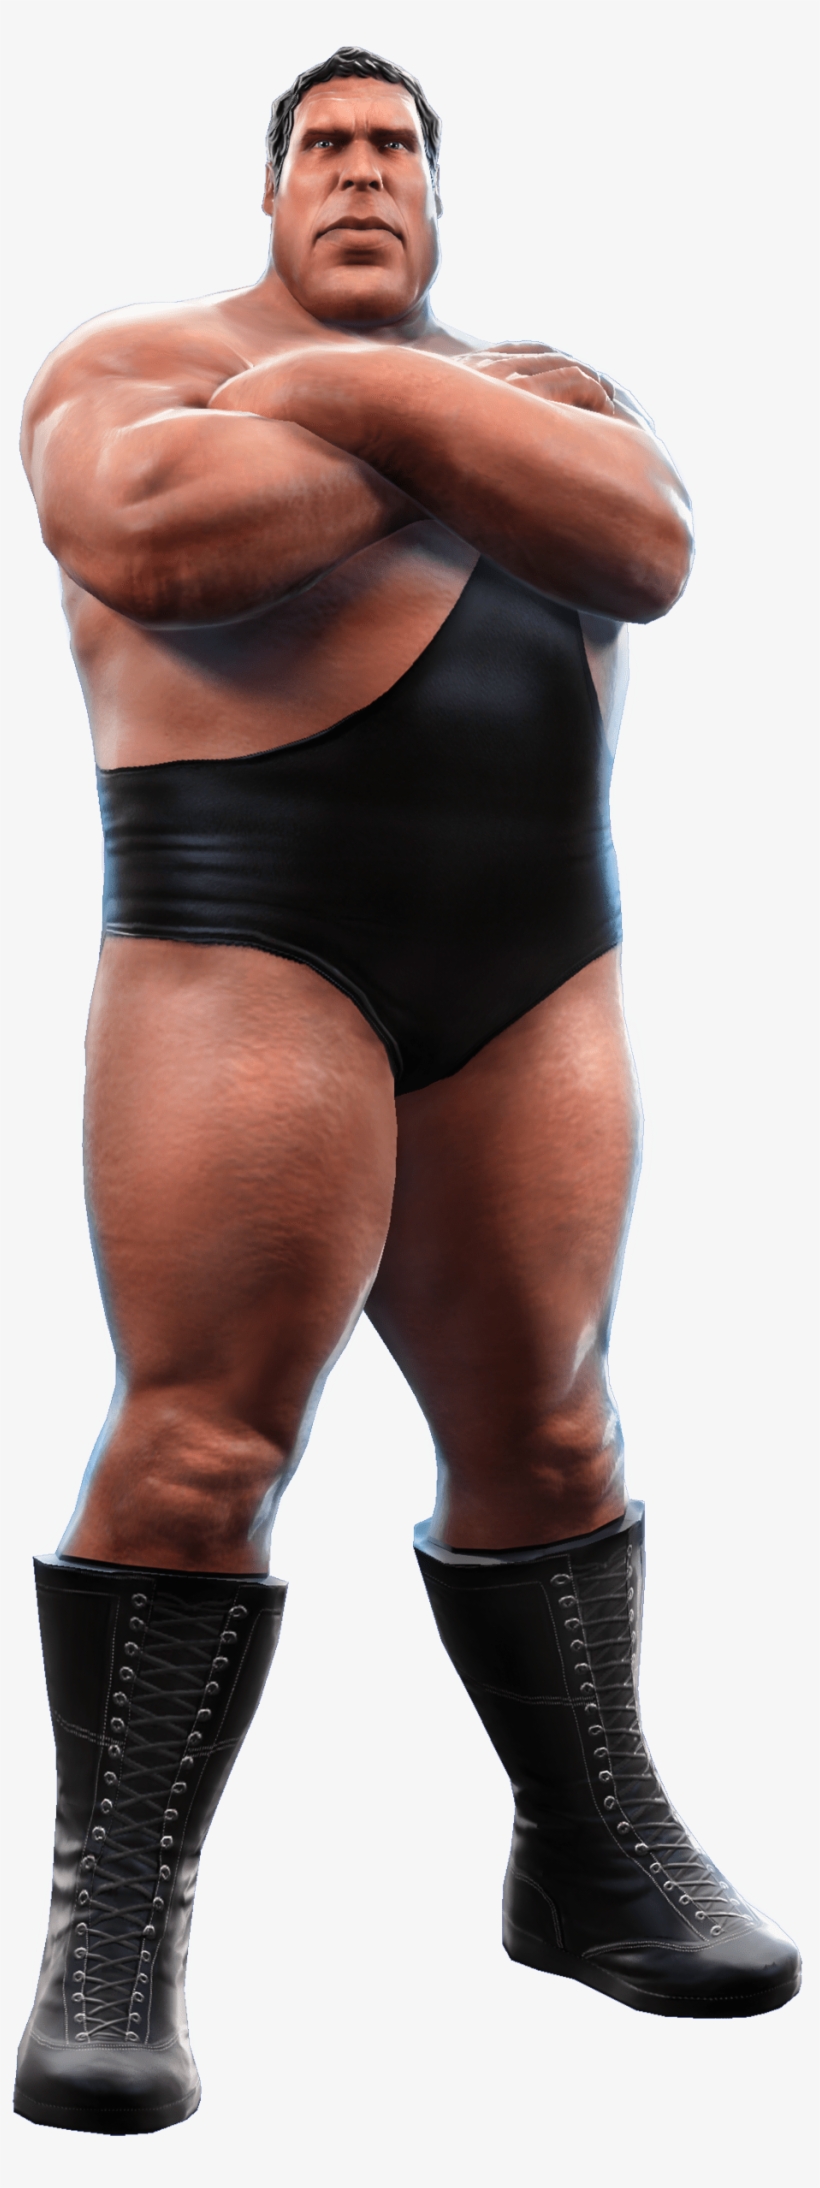 Giant Or G-iant - Andre The Giant Cartoon, transparent png #1528807